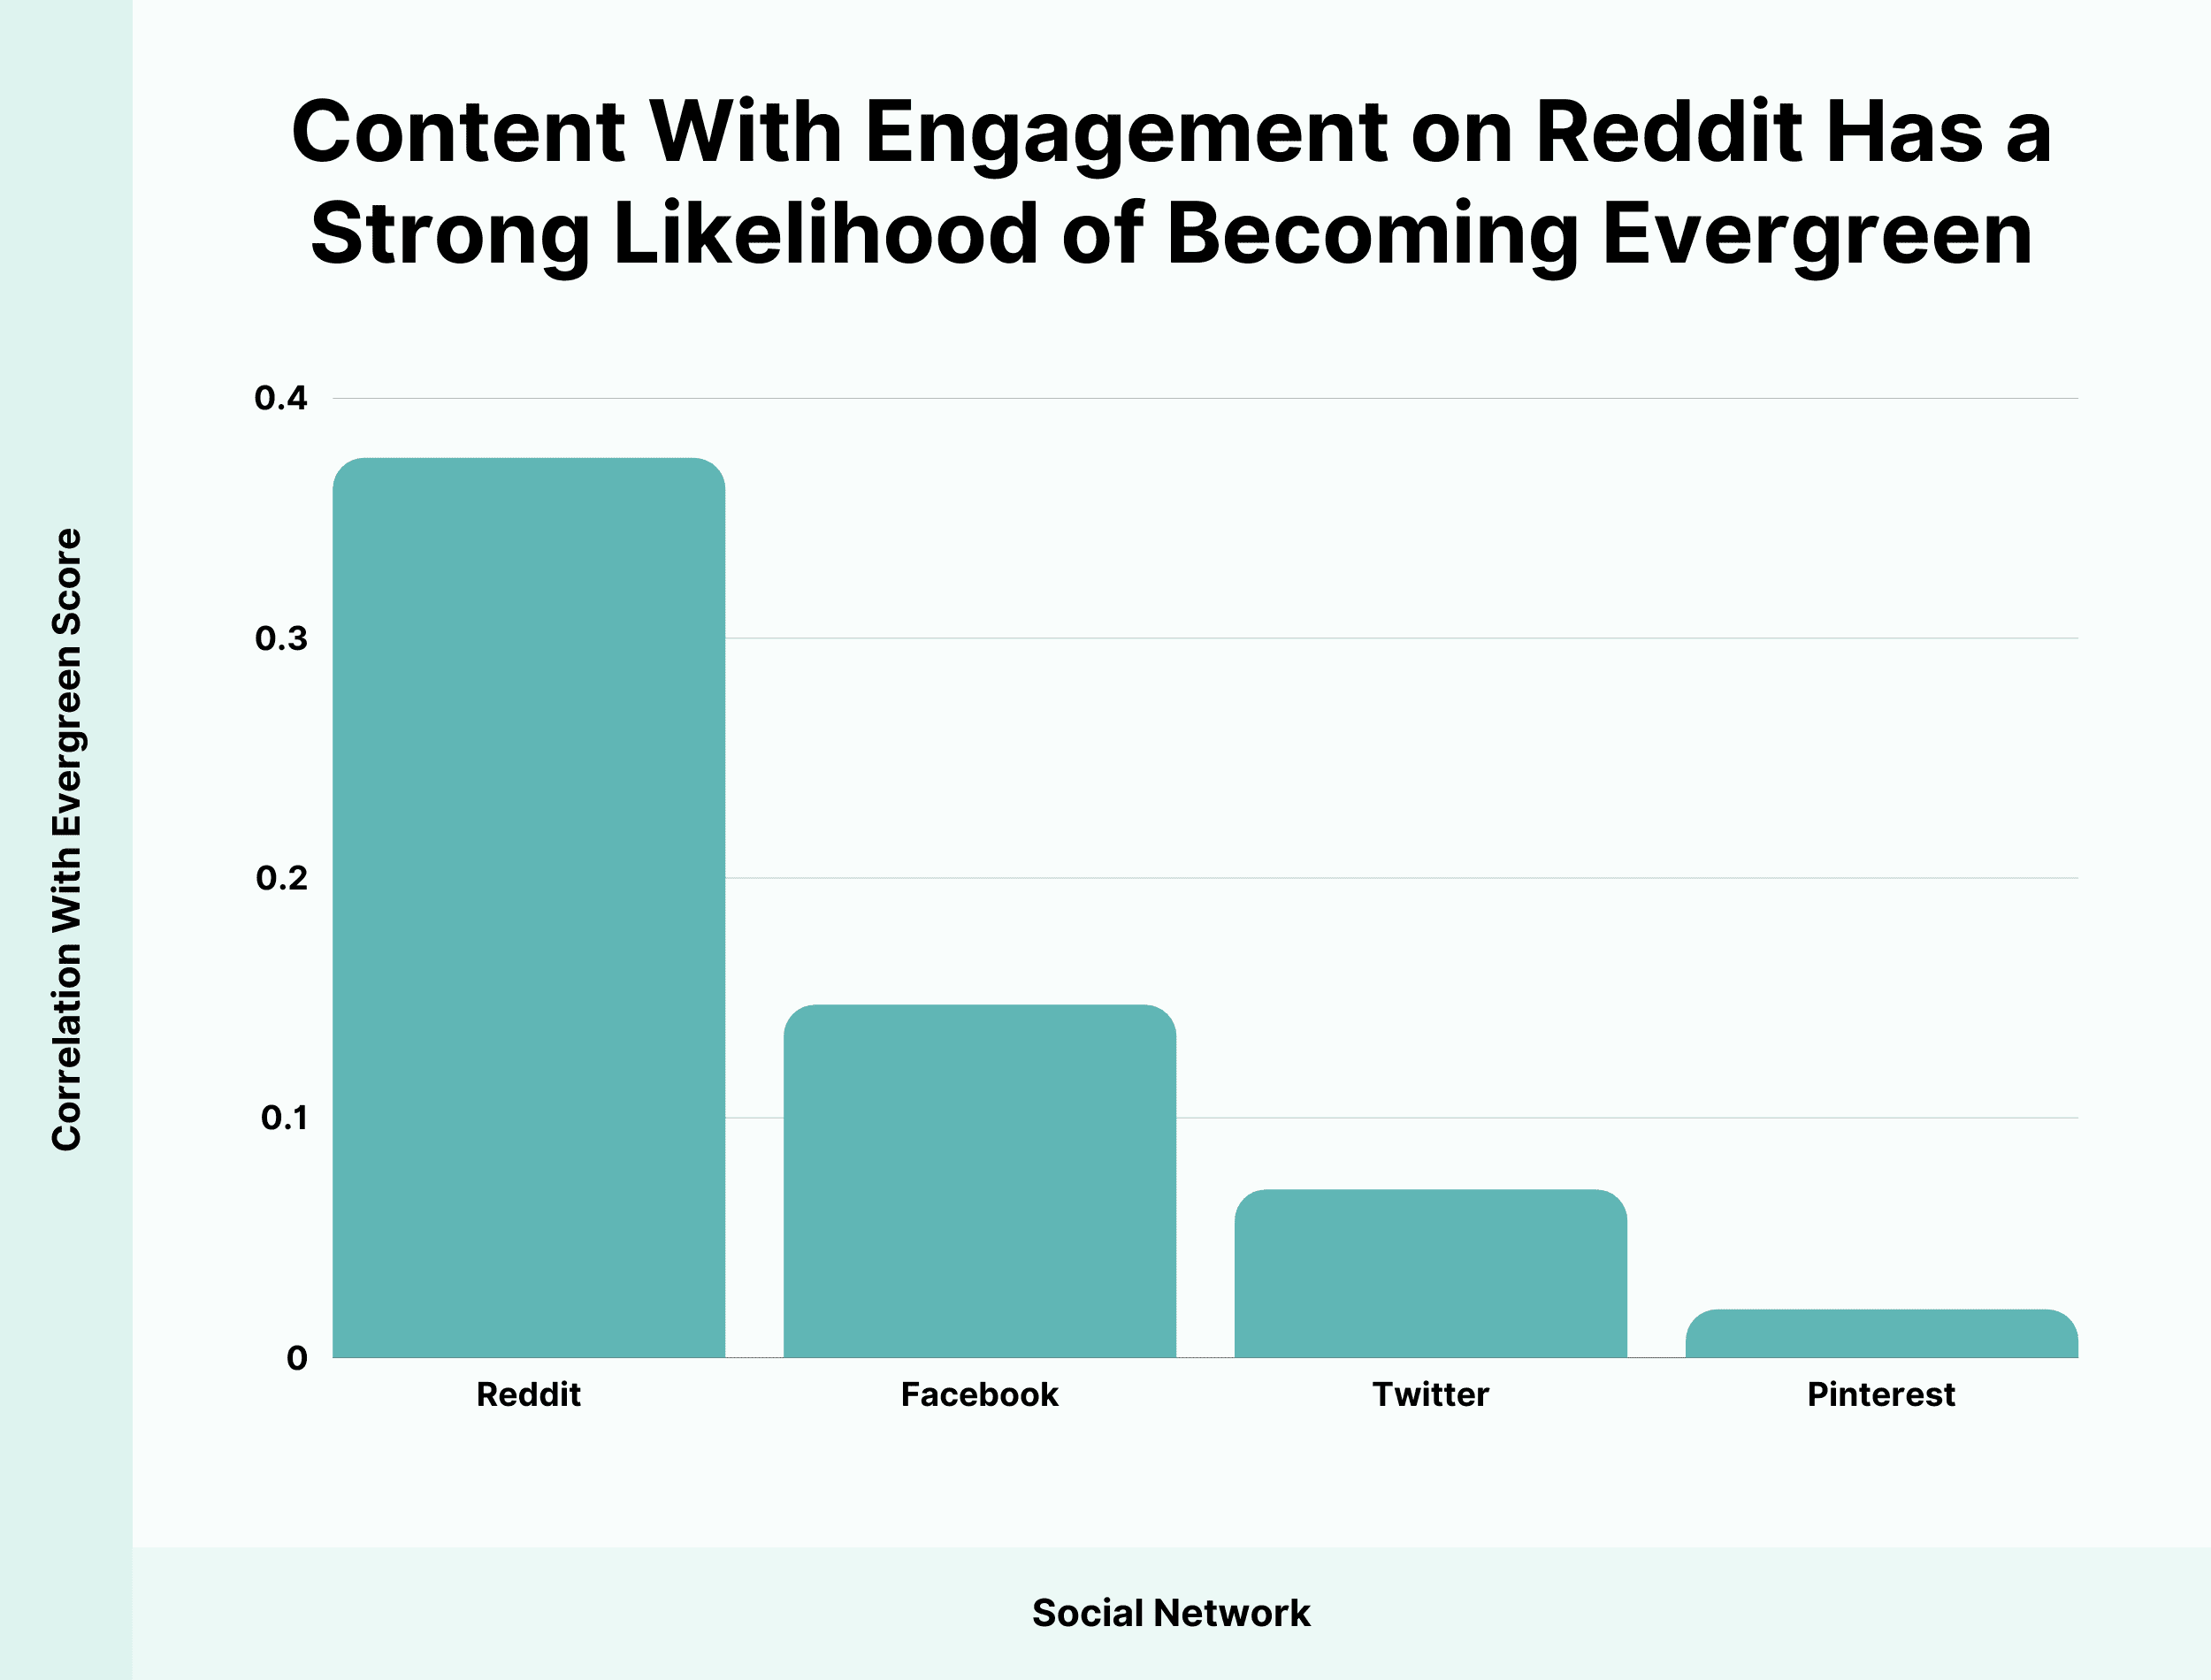 Content with engagement on Reddit has a strong likelihood of becoming evergreen